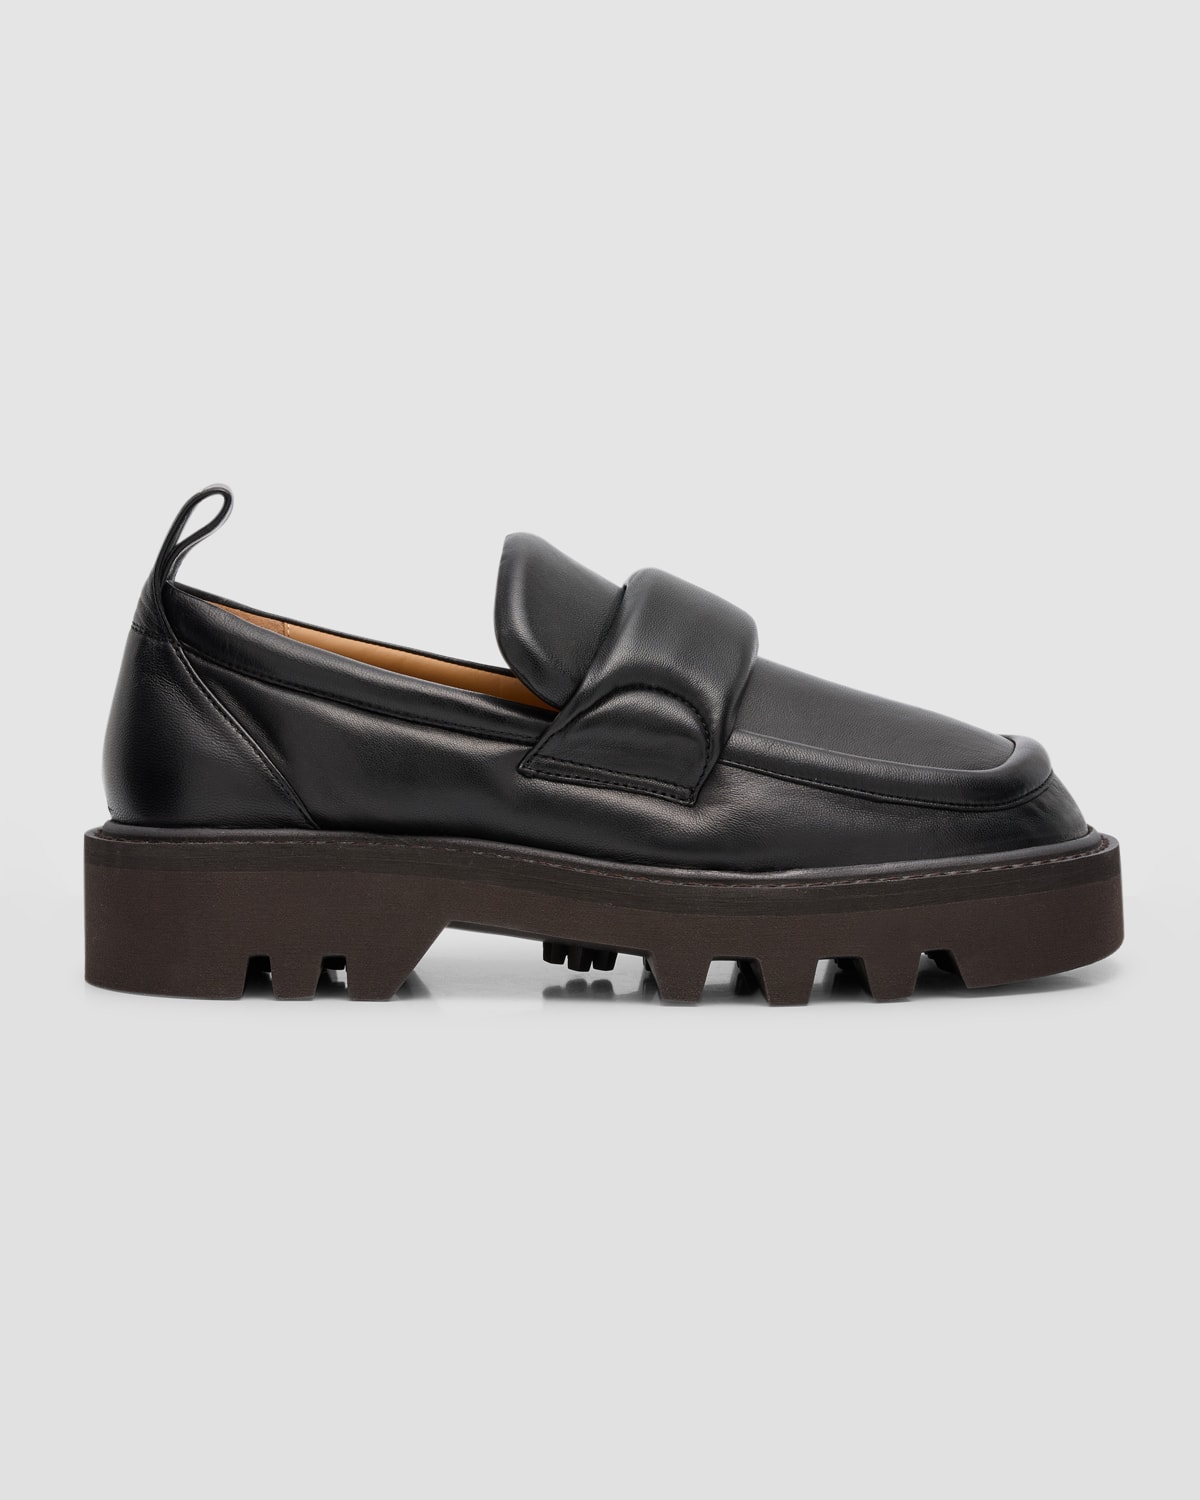 DRIES VAN NOTEN MEN'S LUGGED LEATHER LOAFERS